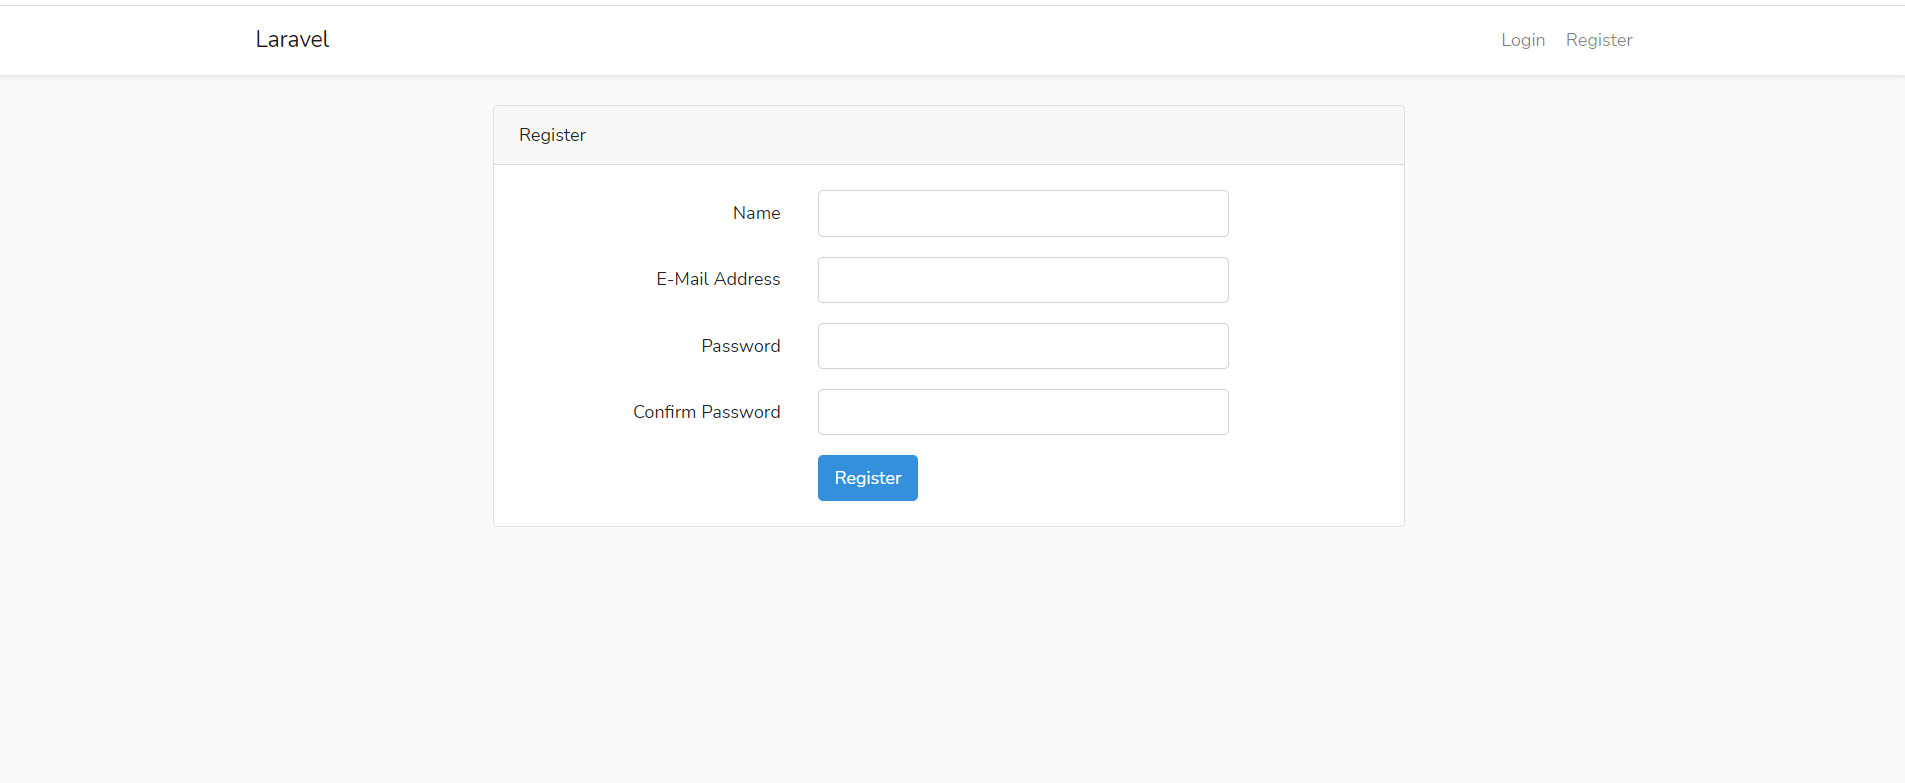 Login register. Ангуляр-ларавел. Register Page. Auth close. Auth user password